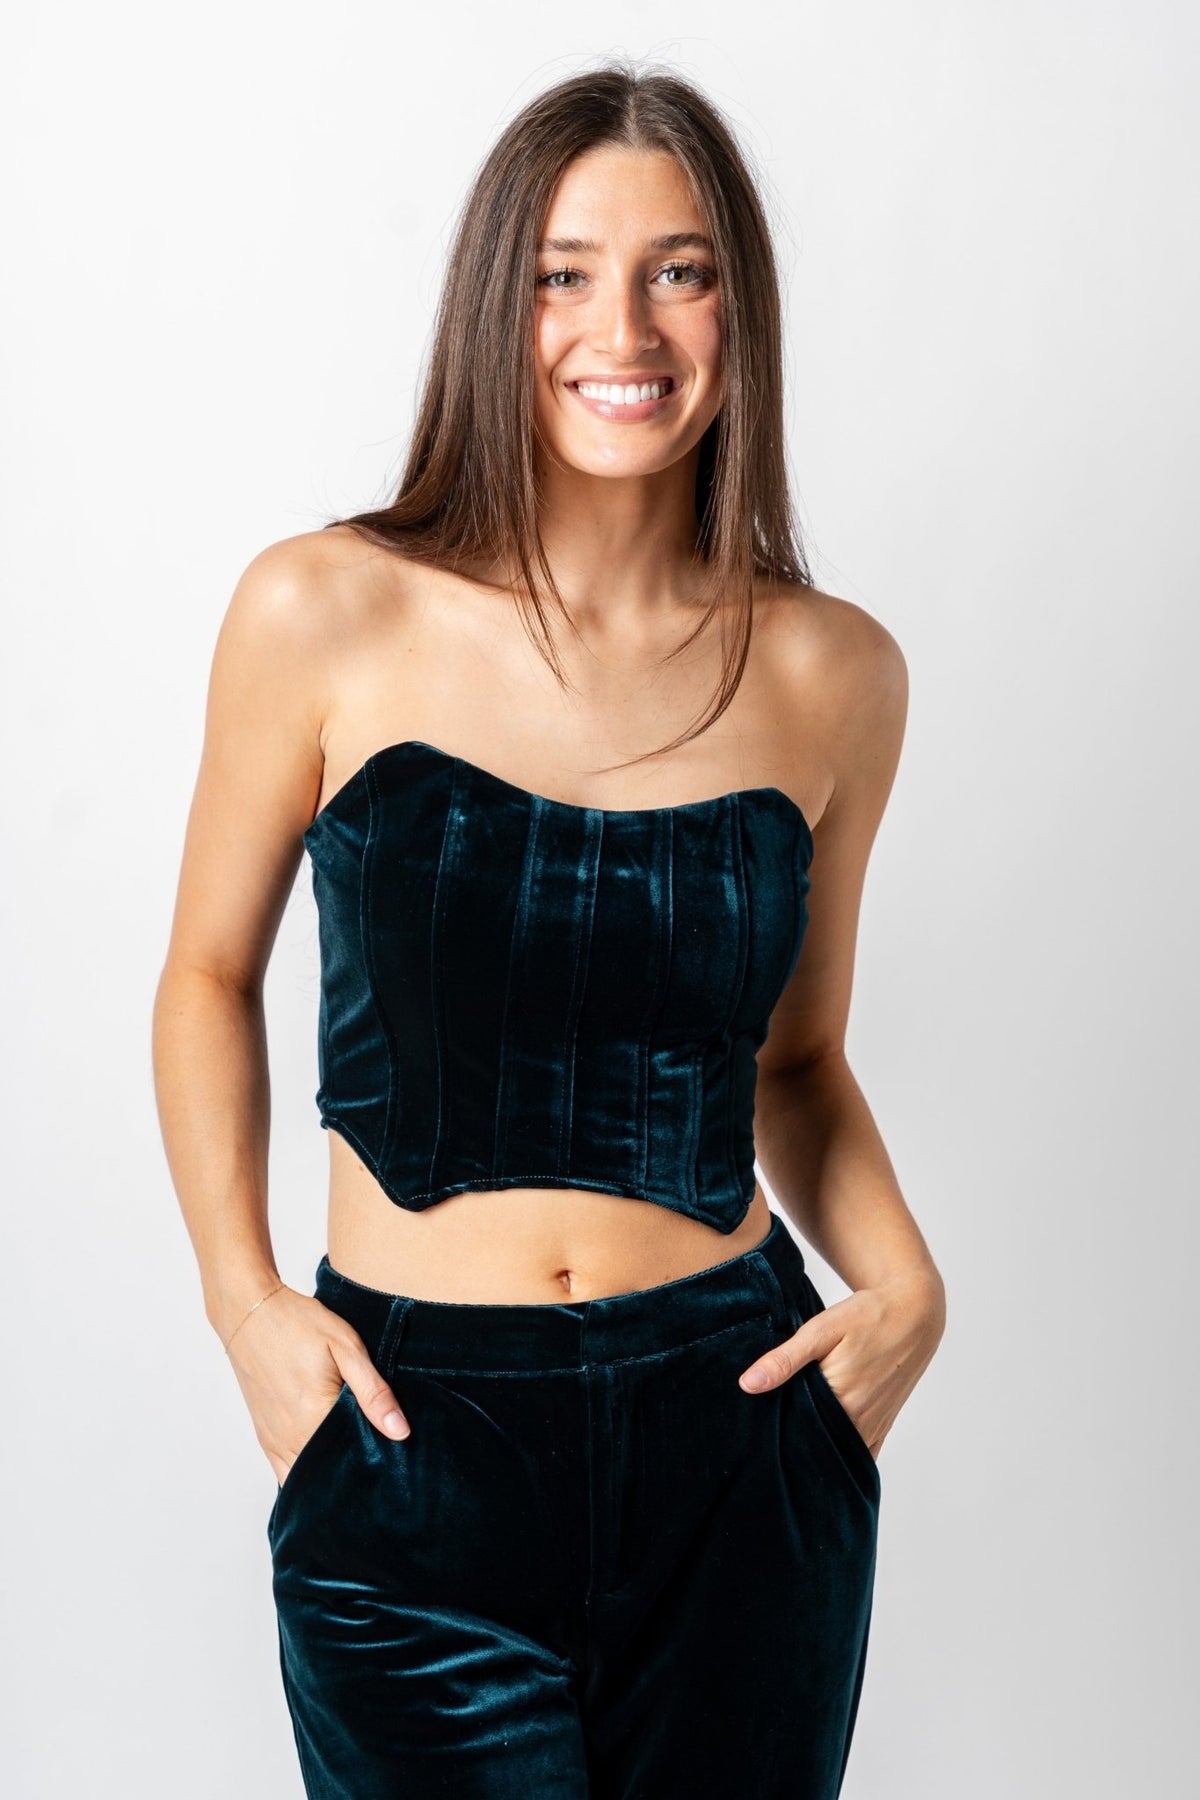 Velvet bustier top green - Trendy Holiday Apparel at Lush Fashion Lounge Boutique in Oklahoma City